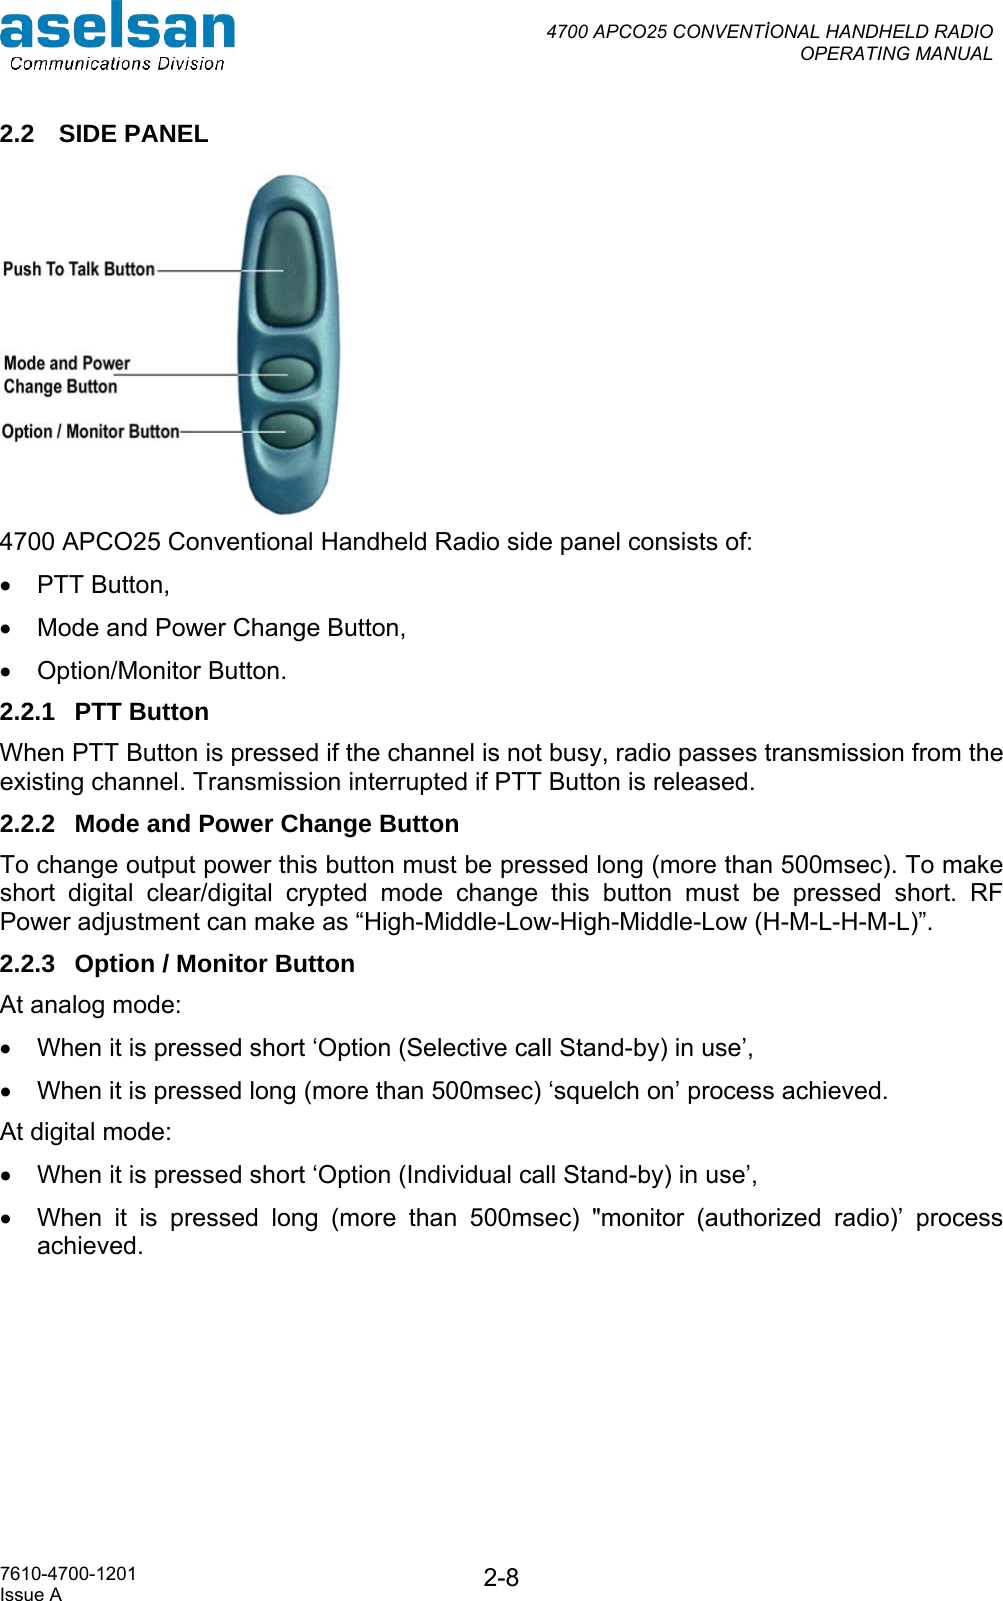  4700 APCO25 CONVENTİONAL HANDHELD RADIO  OPERATING MANUAL   7610-4700-1201 Issue A  2-82.2 SIDE PANEL  4700 APCO25 Conventional Handheld Radio side panel consists of: •  PTT Button,  •  Mode and Power Change Button, •  Option/Monitor Button. 2.2.1 PTT Button When PTT Button is pressed if the channel is not busy, radio passes transmission from the existing channel. Transmission interrupted if PTT Button is released.  2.2.2  Mode and Power Change Button To change output power this button must be pressed long (more than 500msec). To make short digital clear/digital crypted mode change this button must be pressed short. RF Power adjustment can make as “High-Middle-Low-High-Middle-Low (H-M-L-H-M-L)”. 2.2.3  Option / Monitor Button  At analog mode: •  When it is pressed short ‘Option (Selective call Stand-by) in use’, •  When it is pressed long (more than 500msec) ‘squelch on’ process achieved. At digital mode:  •  When it is pressed short ‘Option (Individual call Stand-by) in use’, •  When it is pressed long (more than 500msec) &quot;monitor (authorized radio)’ process achieved.  